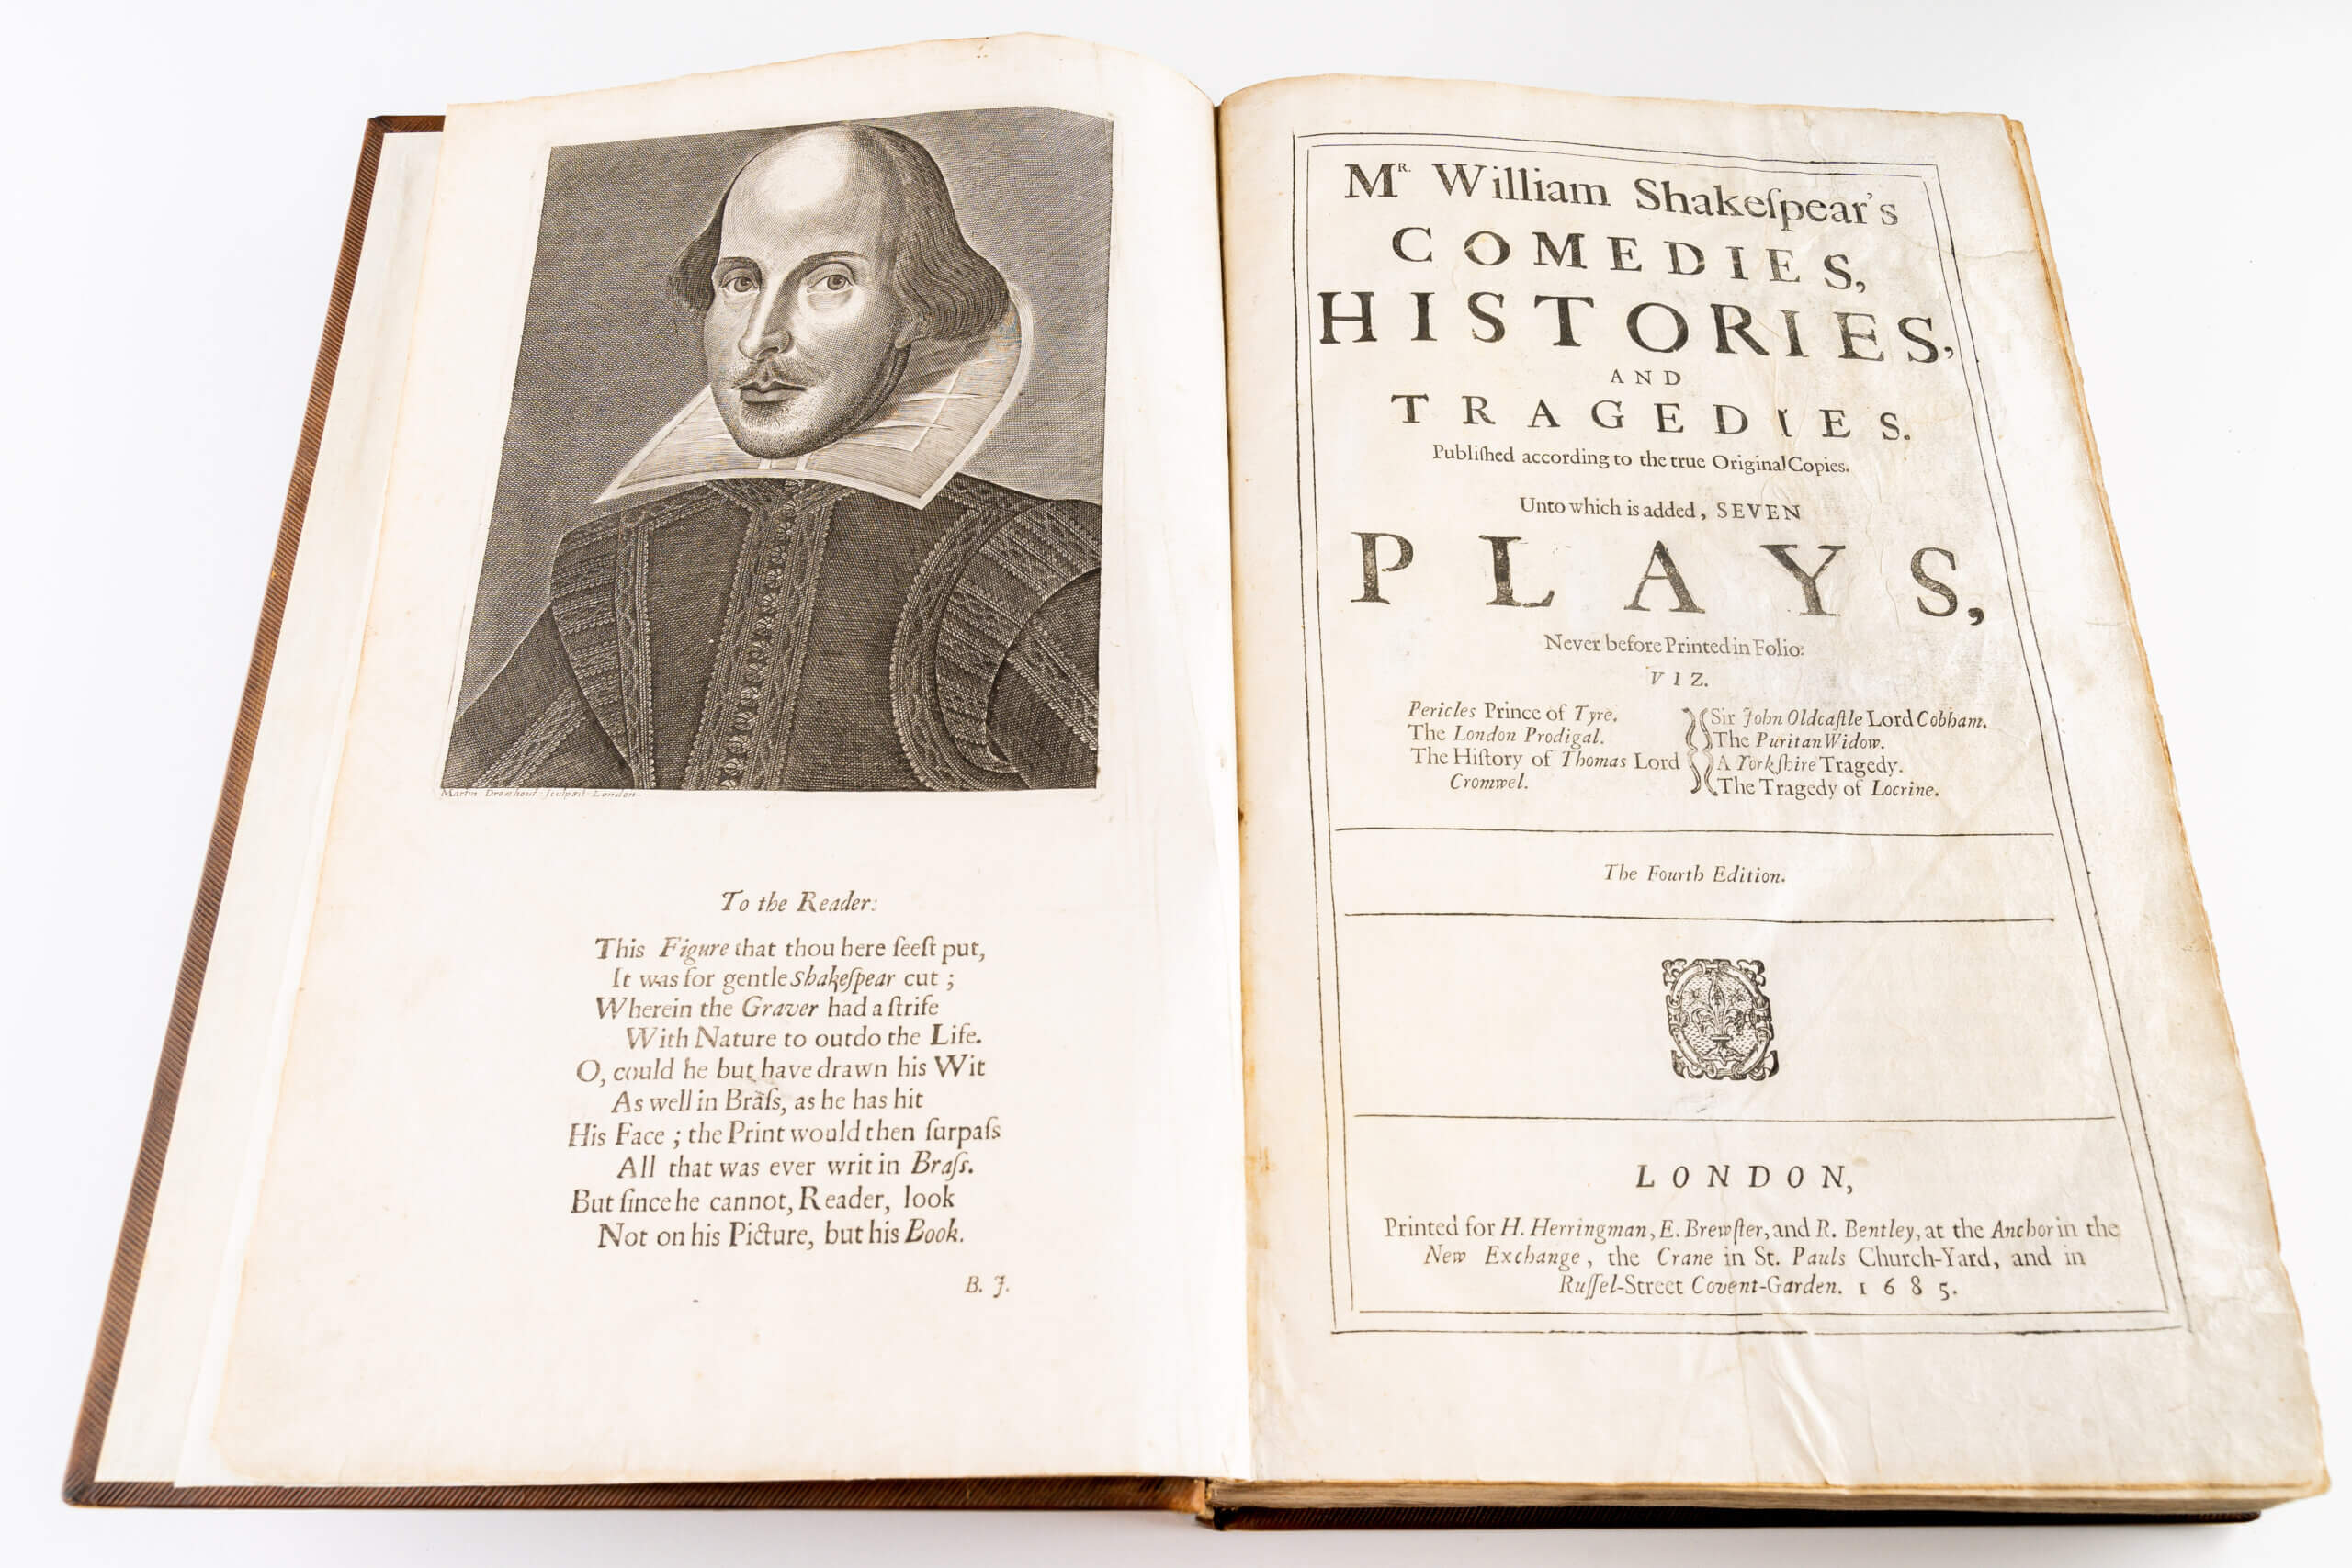 The title page to Rally's Fourth Folio Shakespeare: Comedies, Histories, and Tragedies